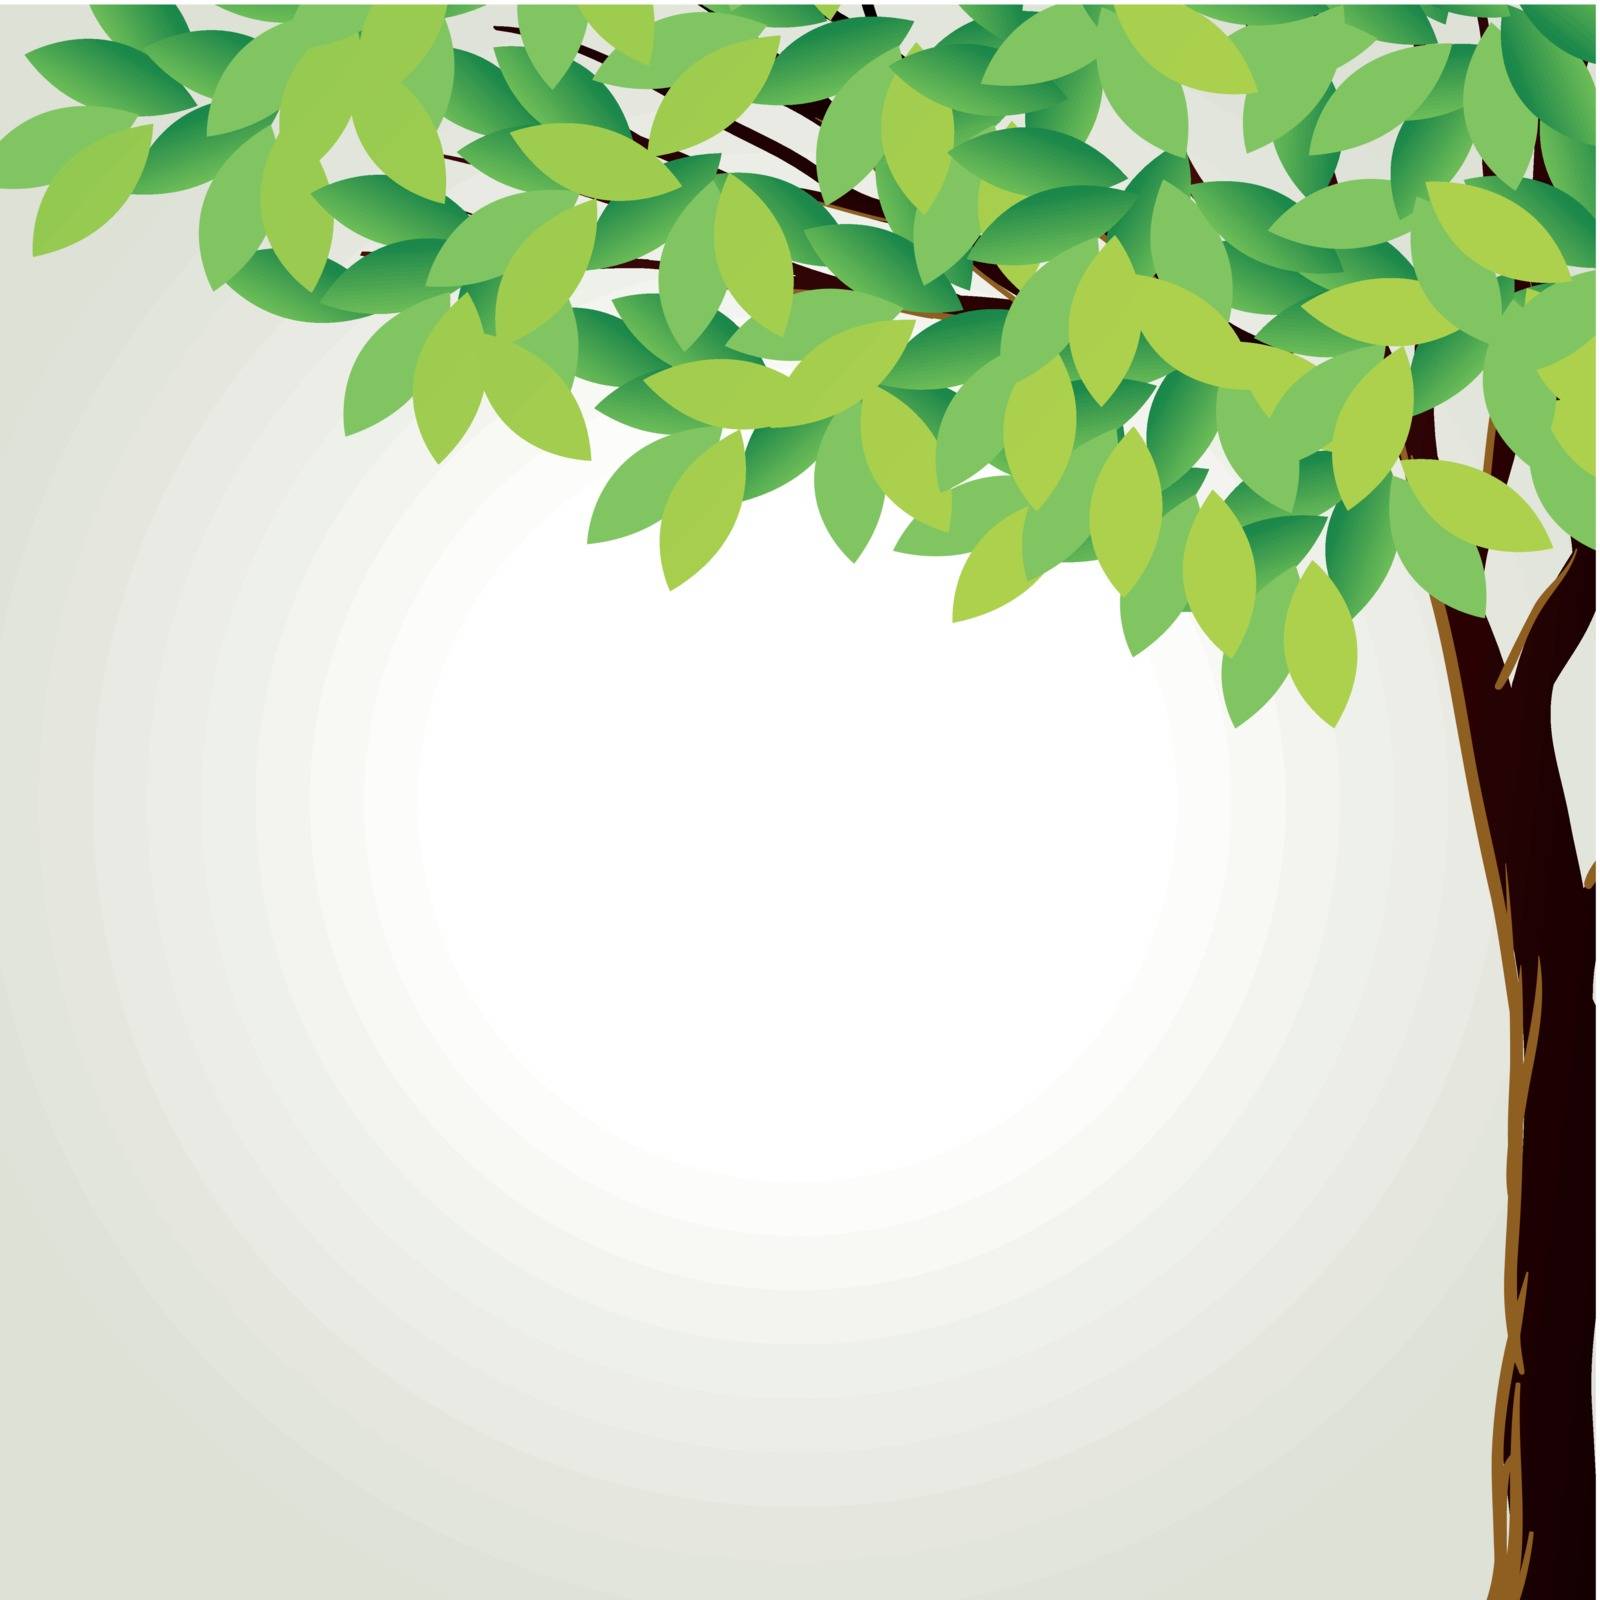 Illustration of a tall tree on a white background